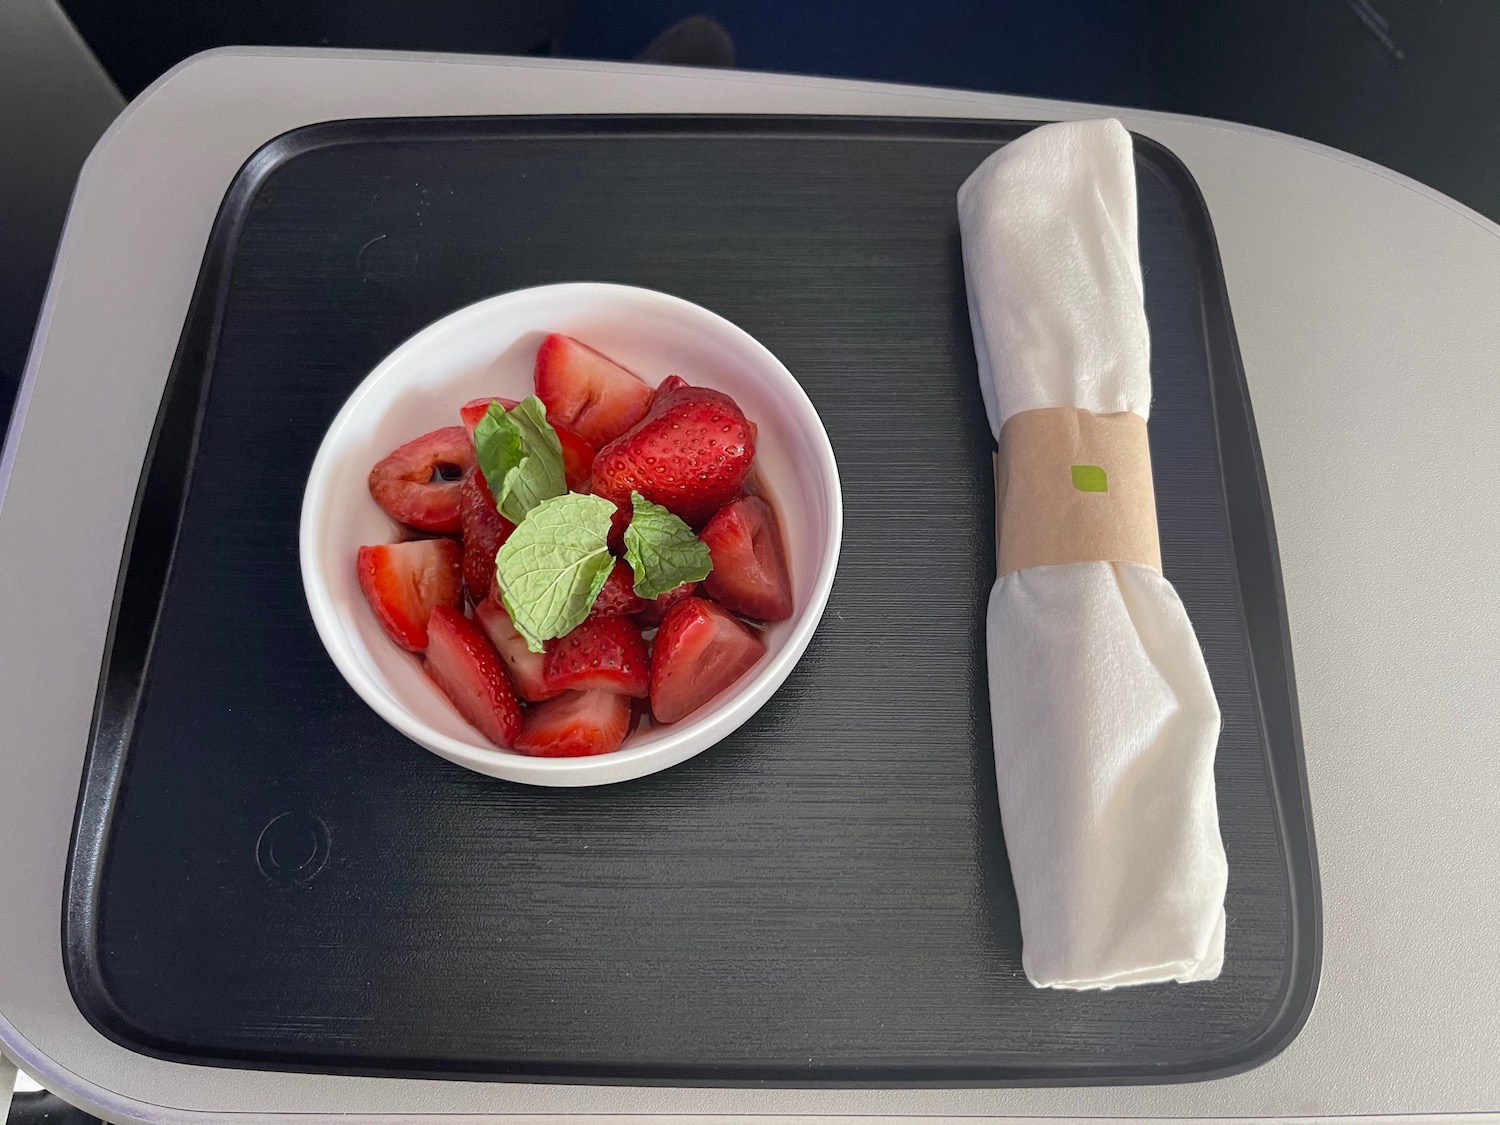 a bowl of strawberries and a napkin on a tray